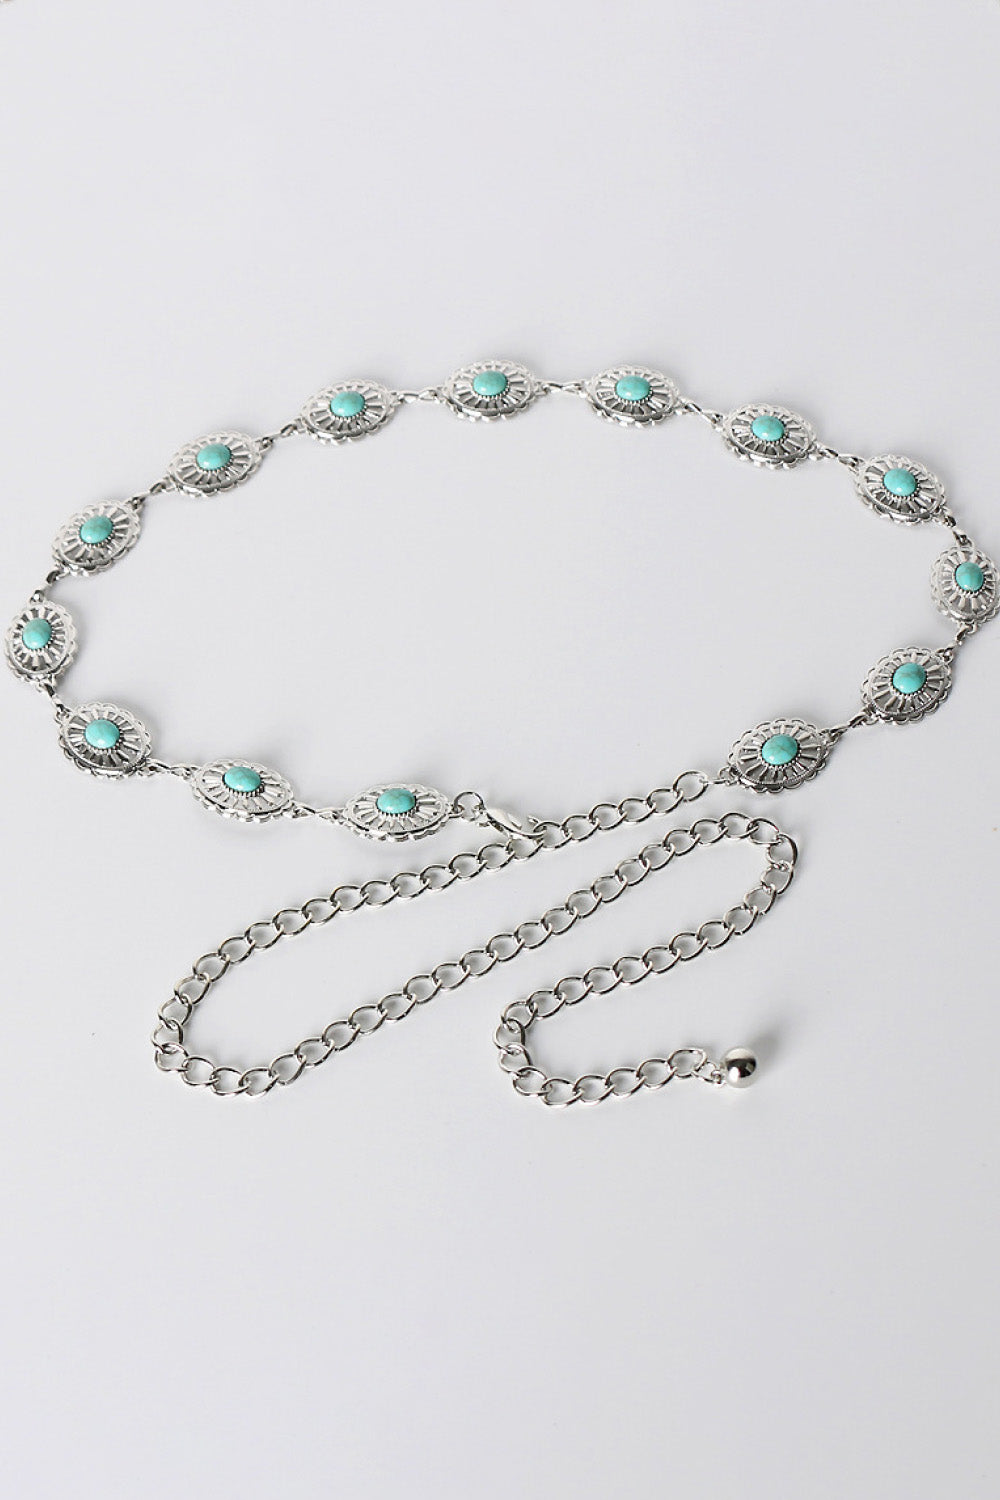 Turquoise, Silver/Gold Tone Chain Belt